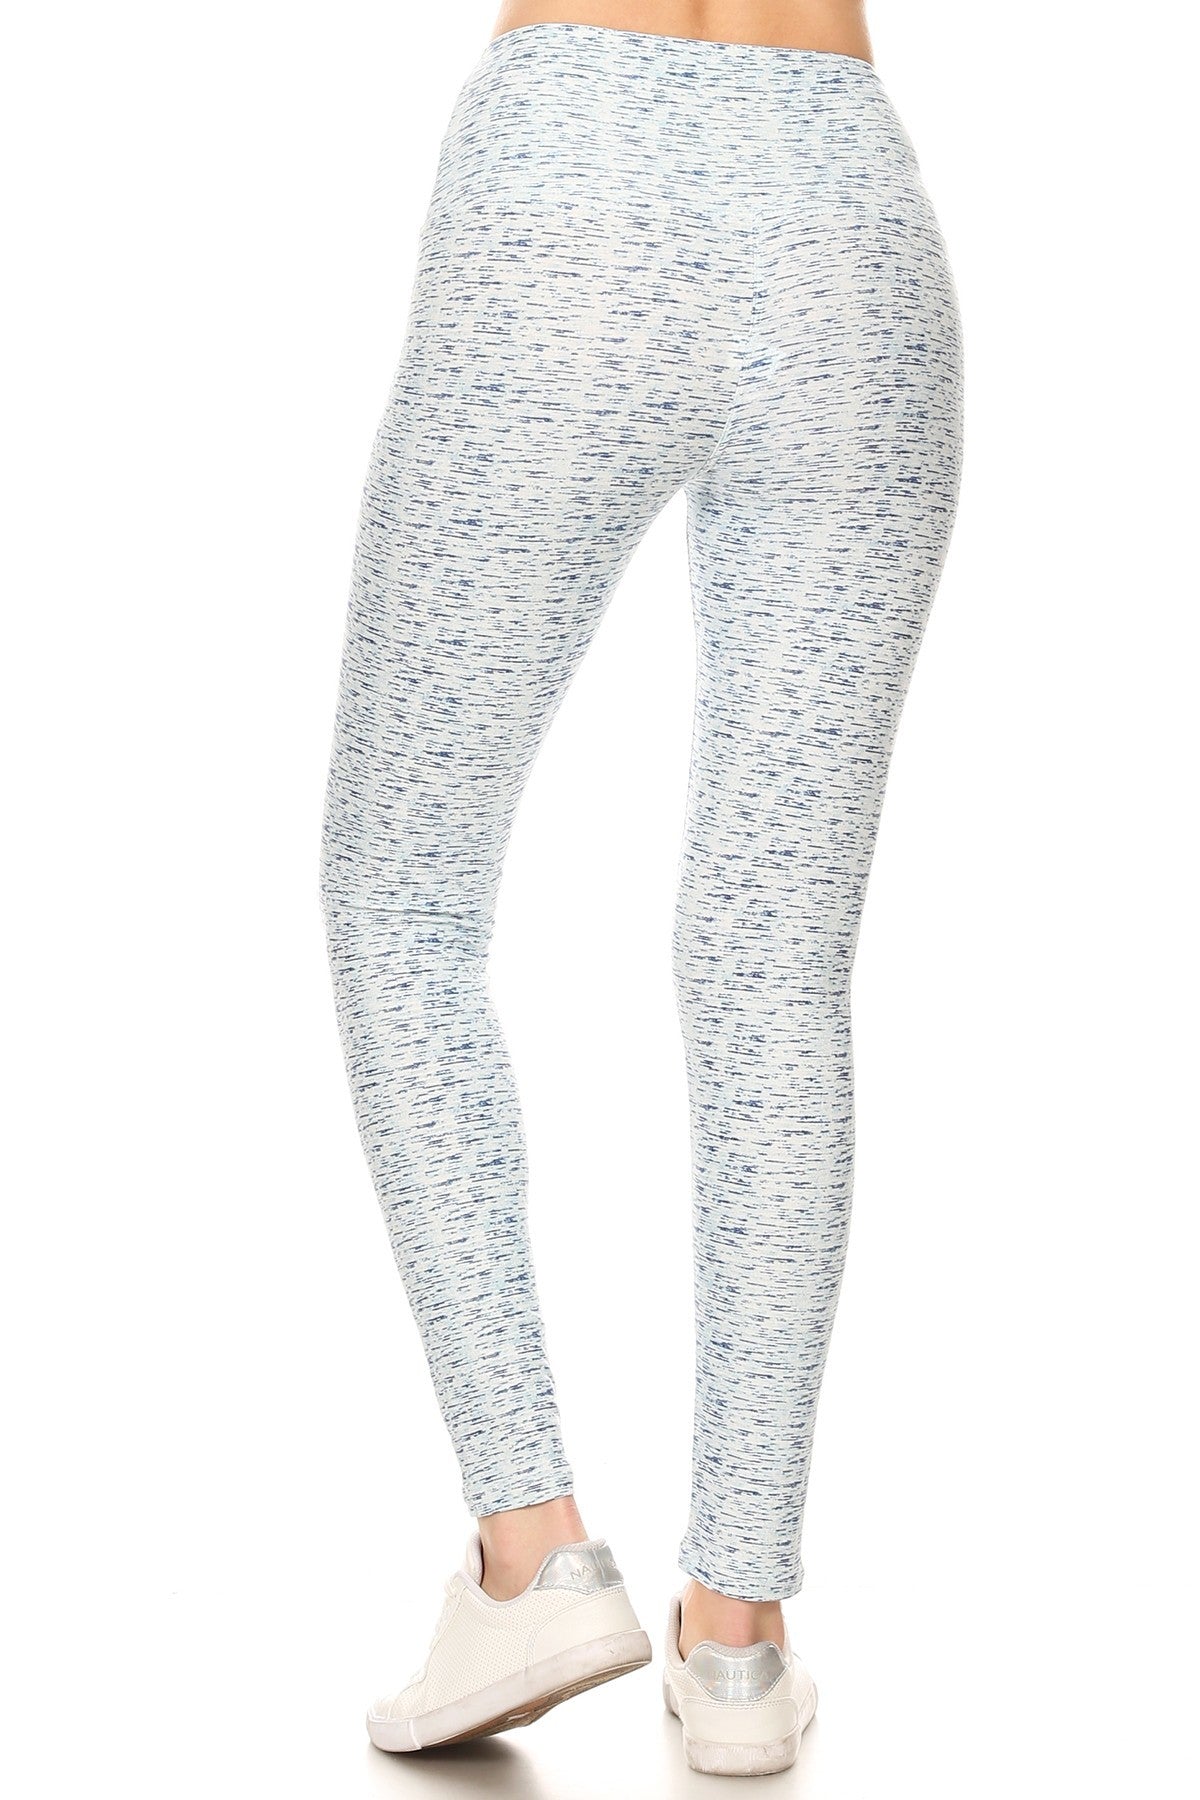 One size 5-inch Long Yoga Style Banded Lined Multi Printed Knit Legging With High Waist